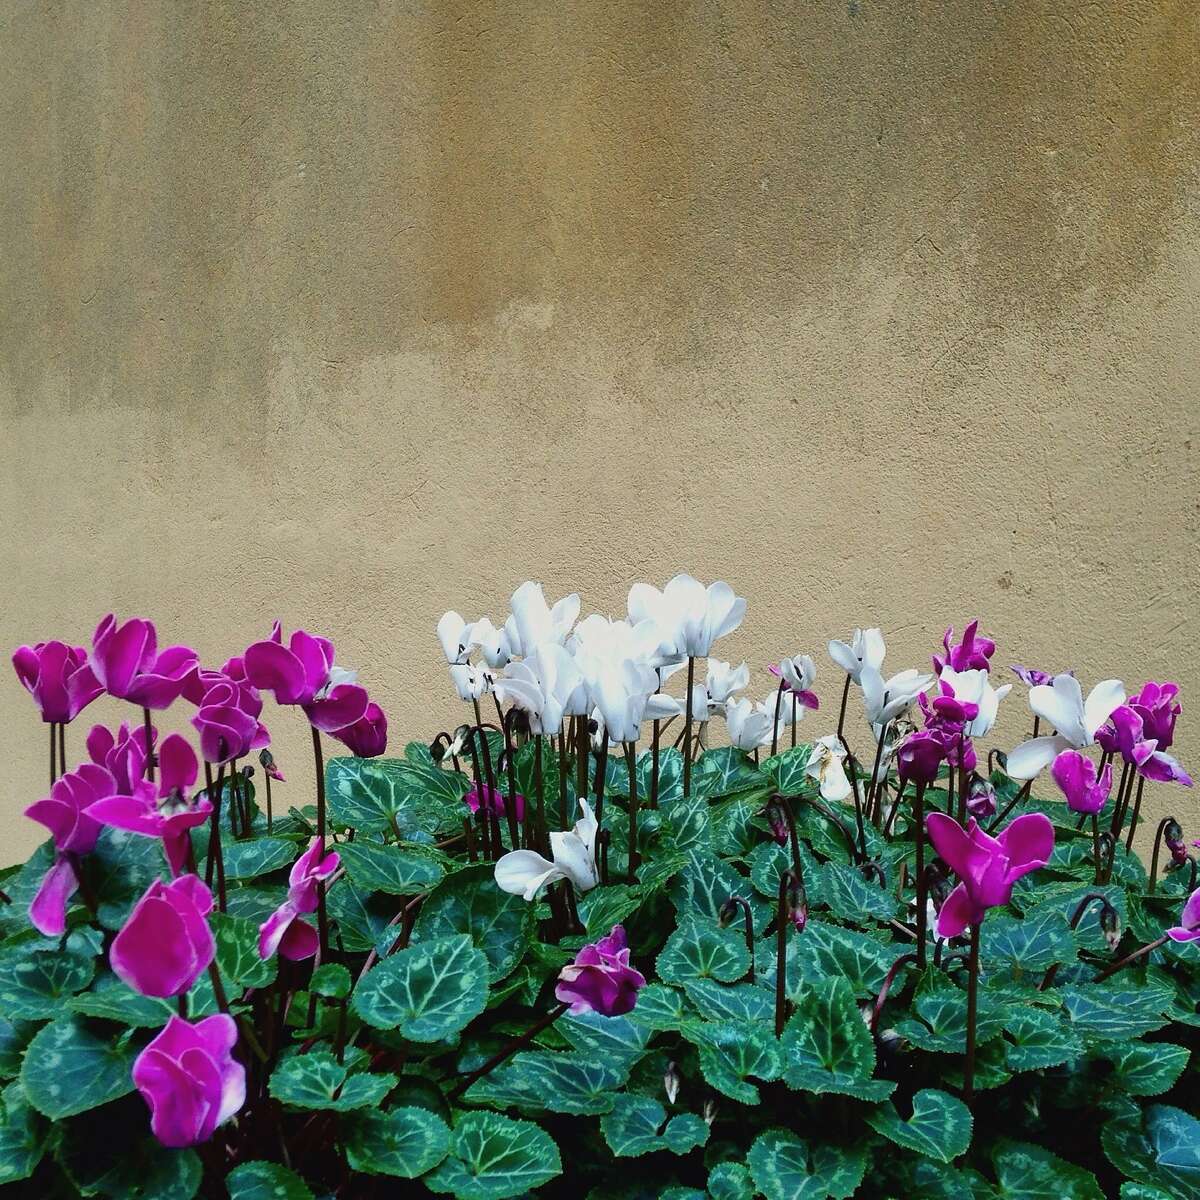 The cyclamen foliage has been unaffected by this year’s freezes, and even the blooms have escaped damage when they were covered by a layer of N-sulate fabric.